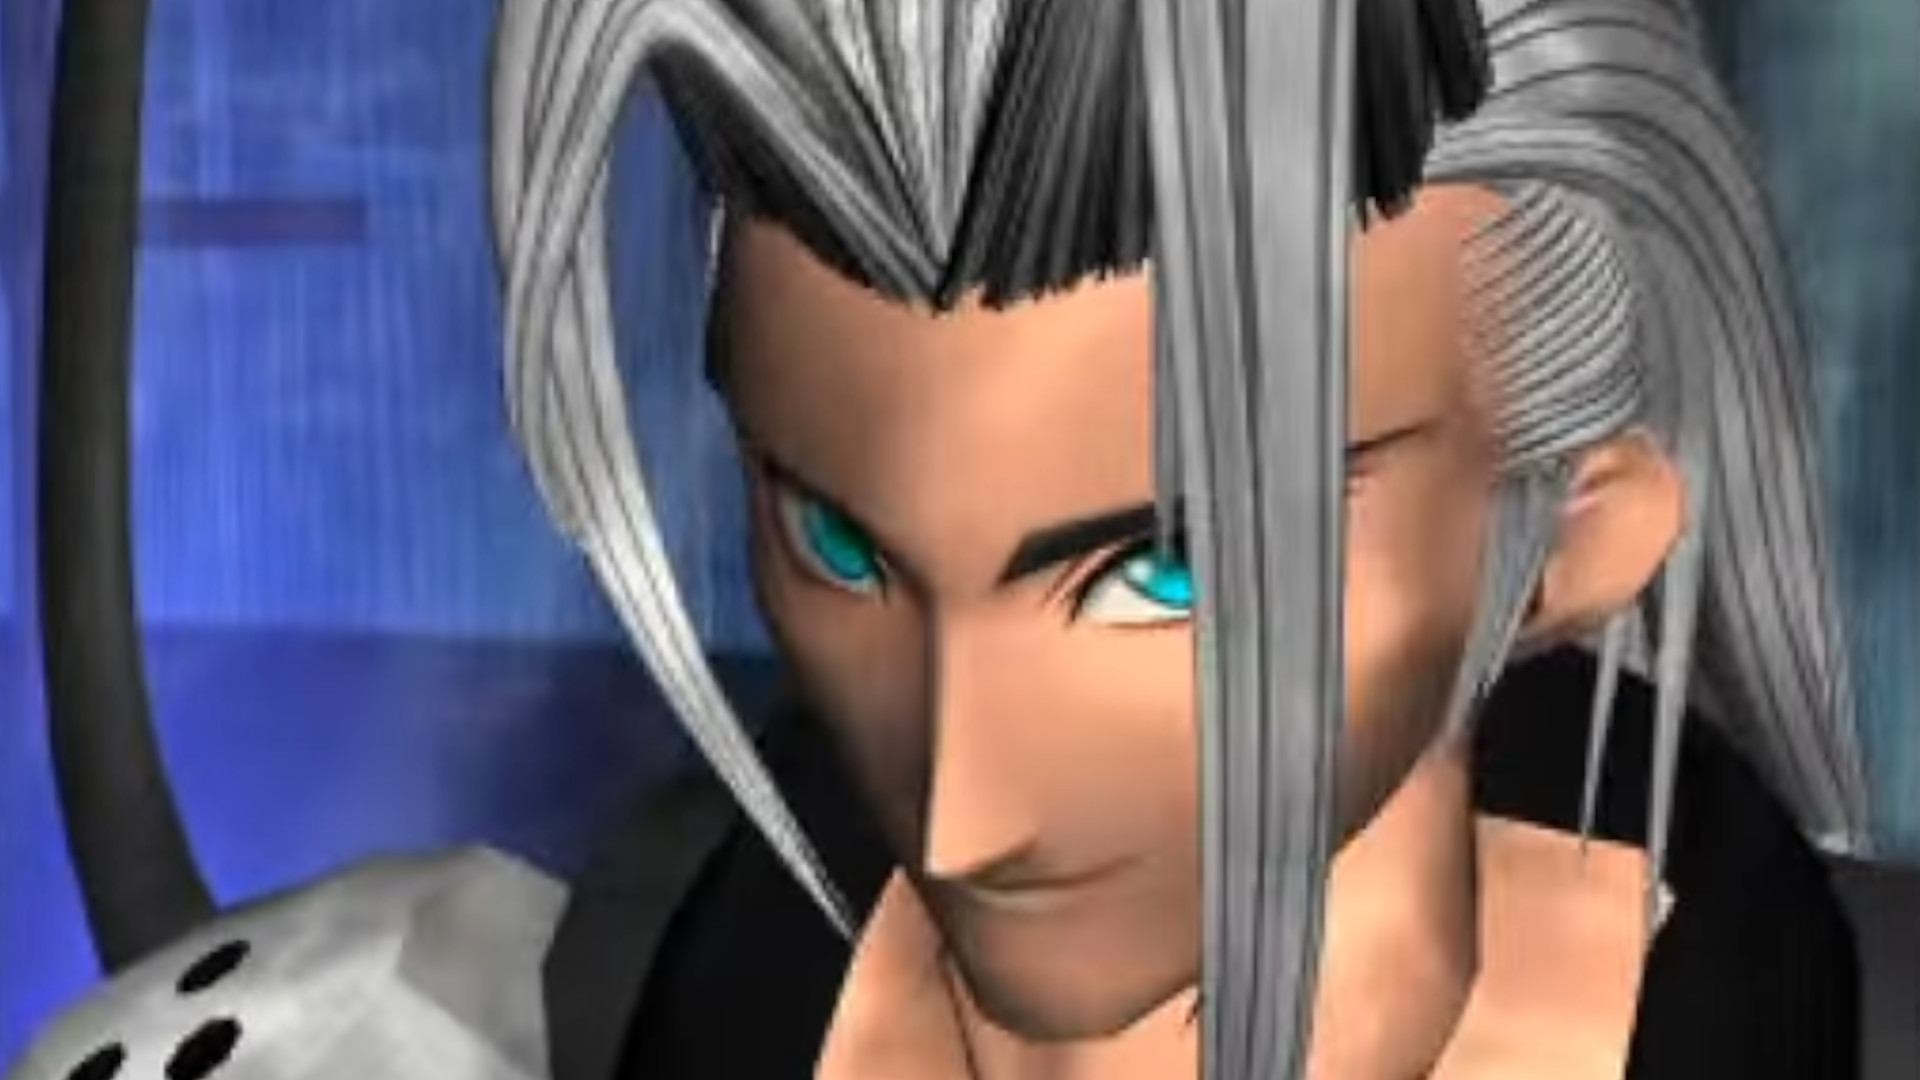 Mario & Luigi Could Beat Sephiroth - Here's Why